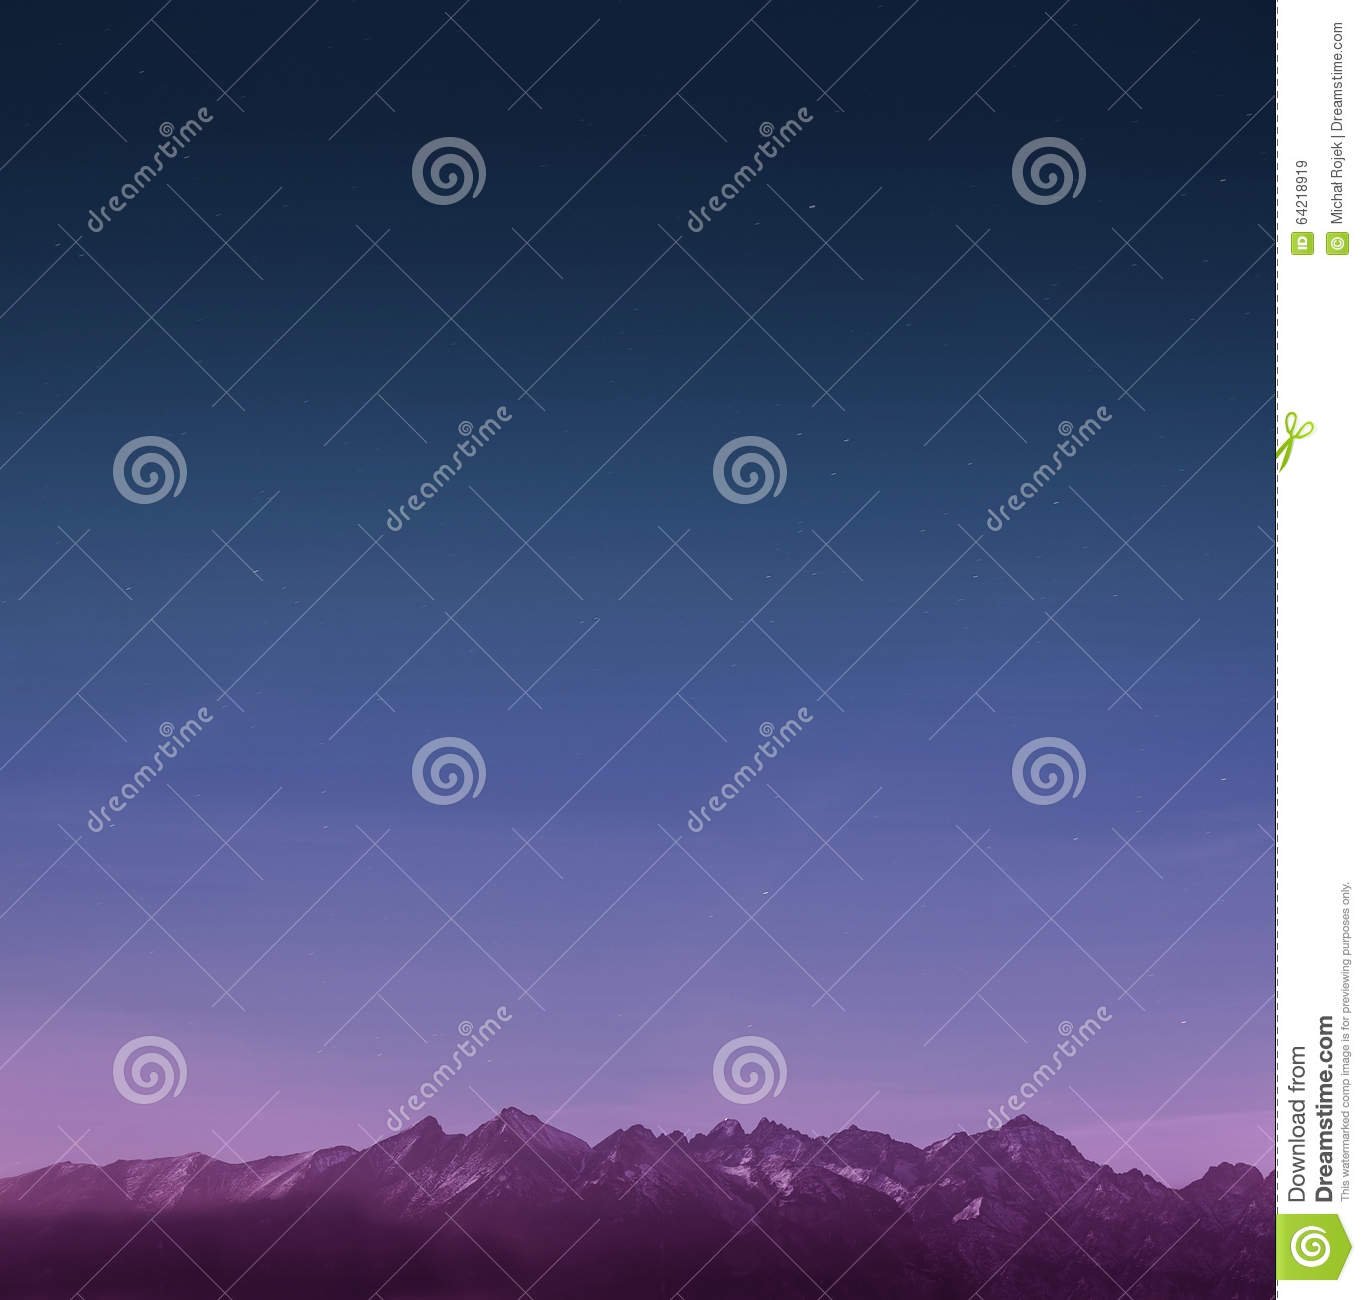 Mountains With Stars Stock Photo   Image  64218919